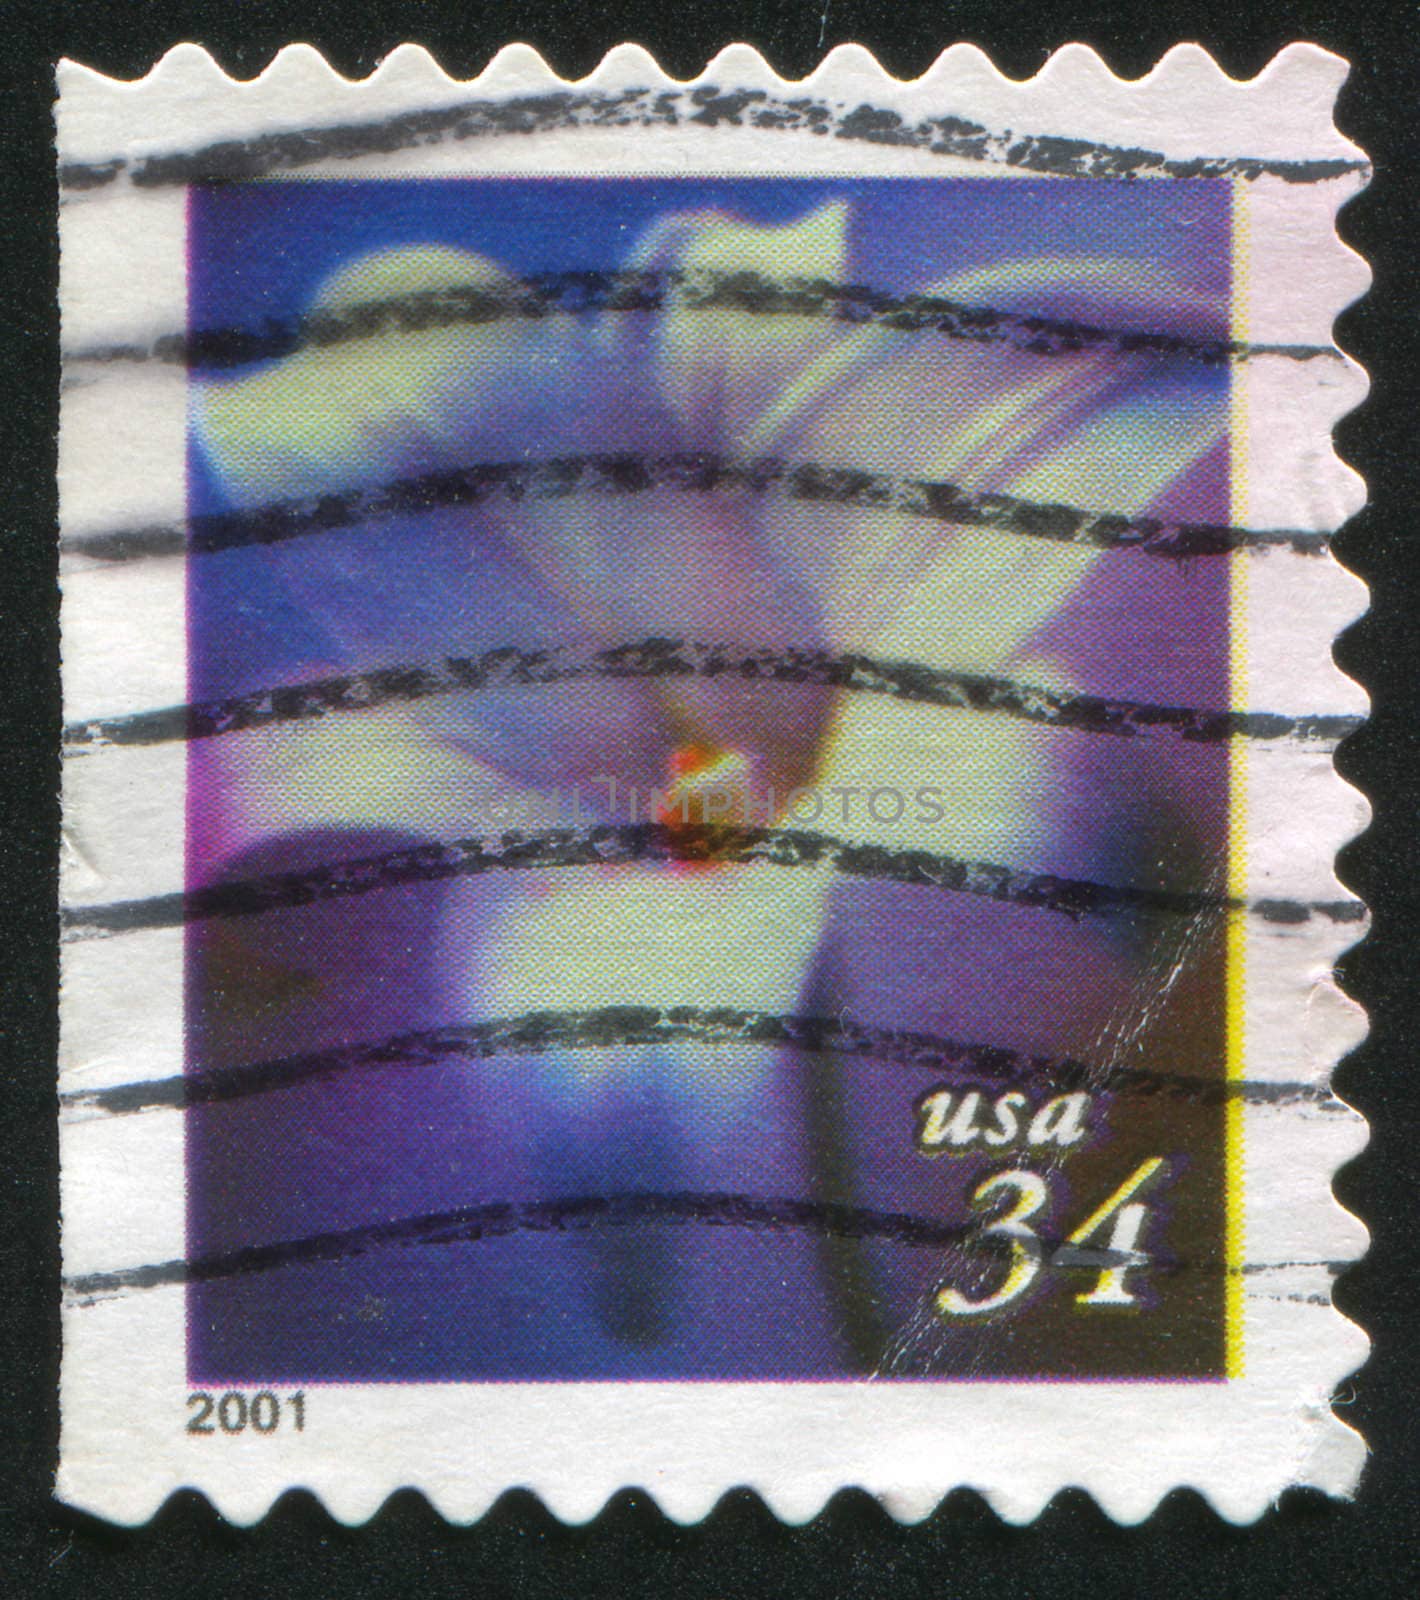 UNITED STATES - CIRCA 2001: stamp printed by United states, shows flower, circa 2001